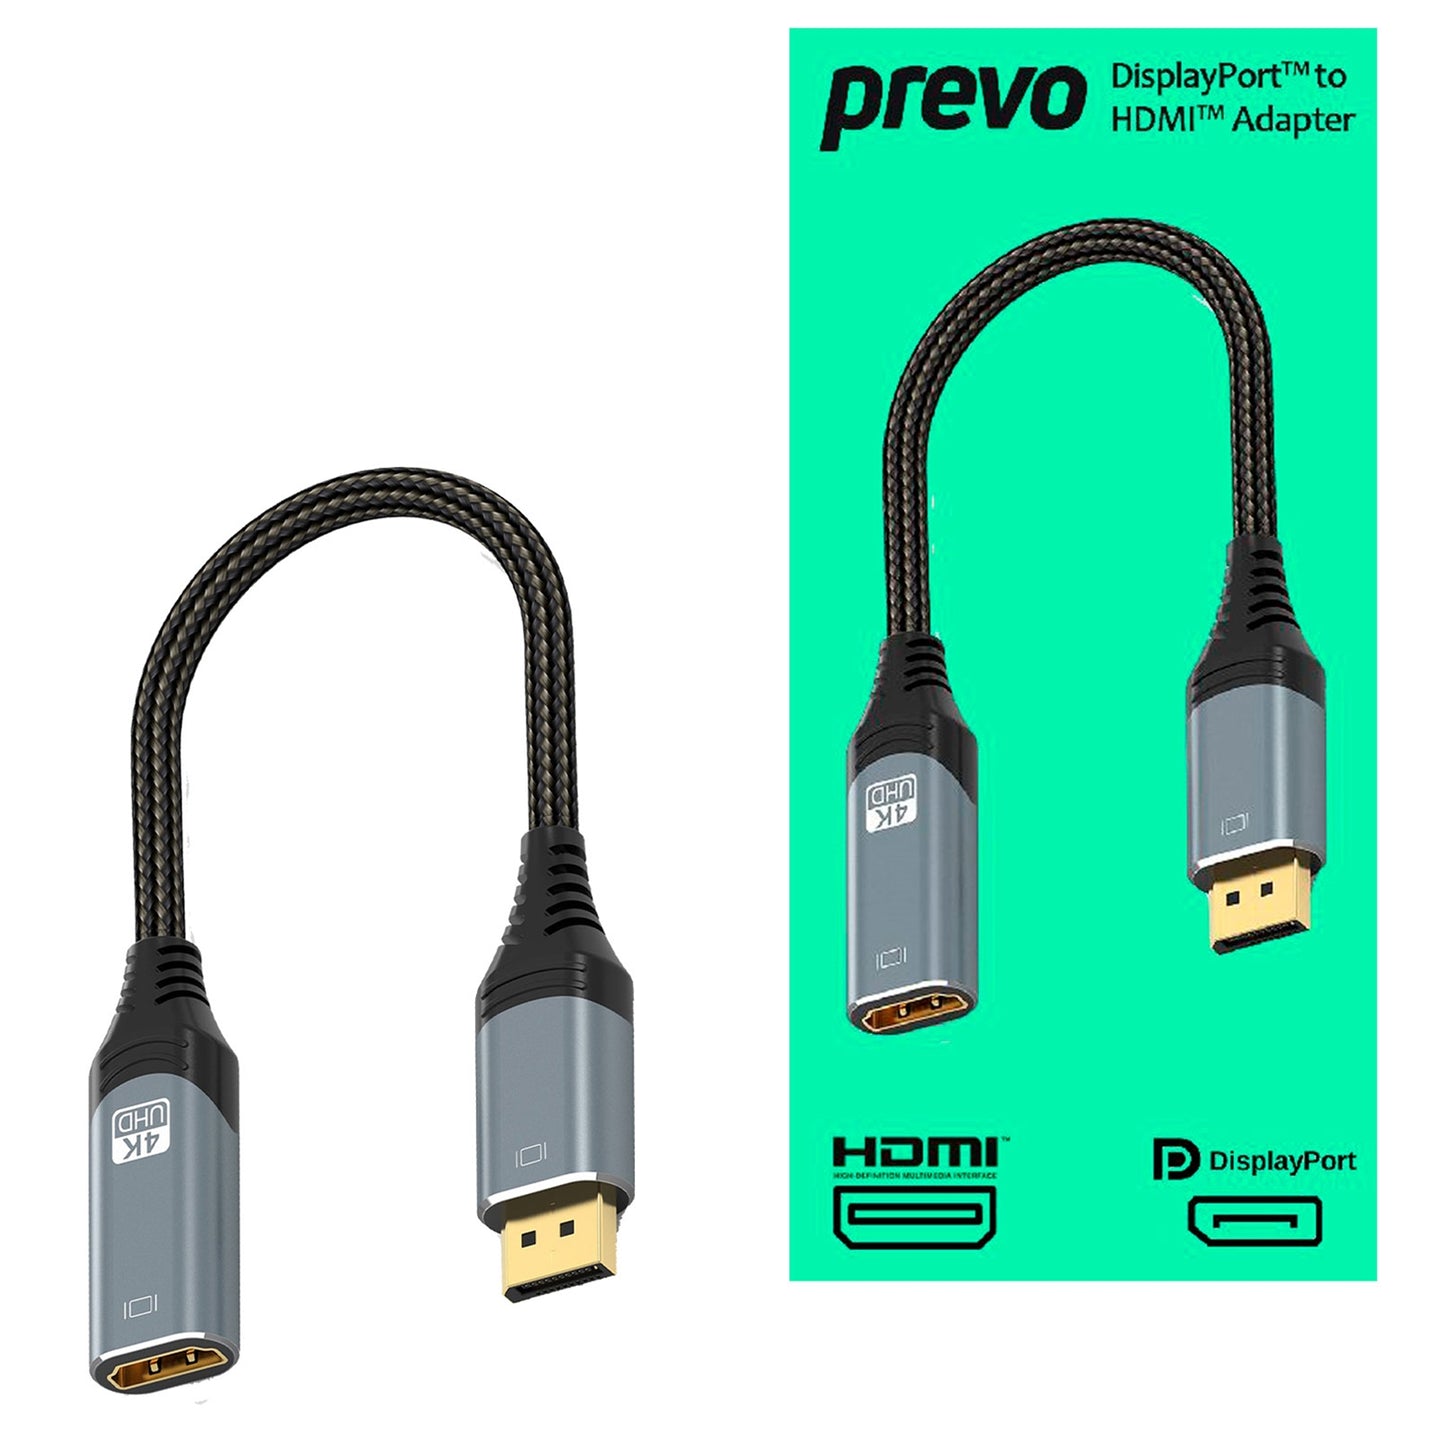 Prevo DPM-HDMIF-ADA Display Converter Adapter, DisplayPort (M) to HDMI (F), 0.2m, Black & Silver, DisplayPort 1.4 & HDMI 2.0, Supports up to 4K@60Hz, Braided Cable